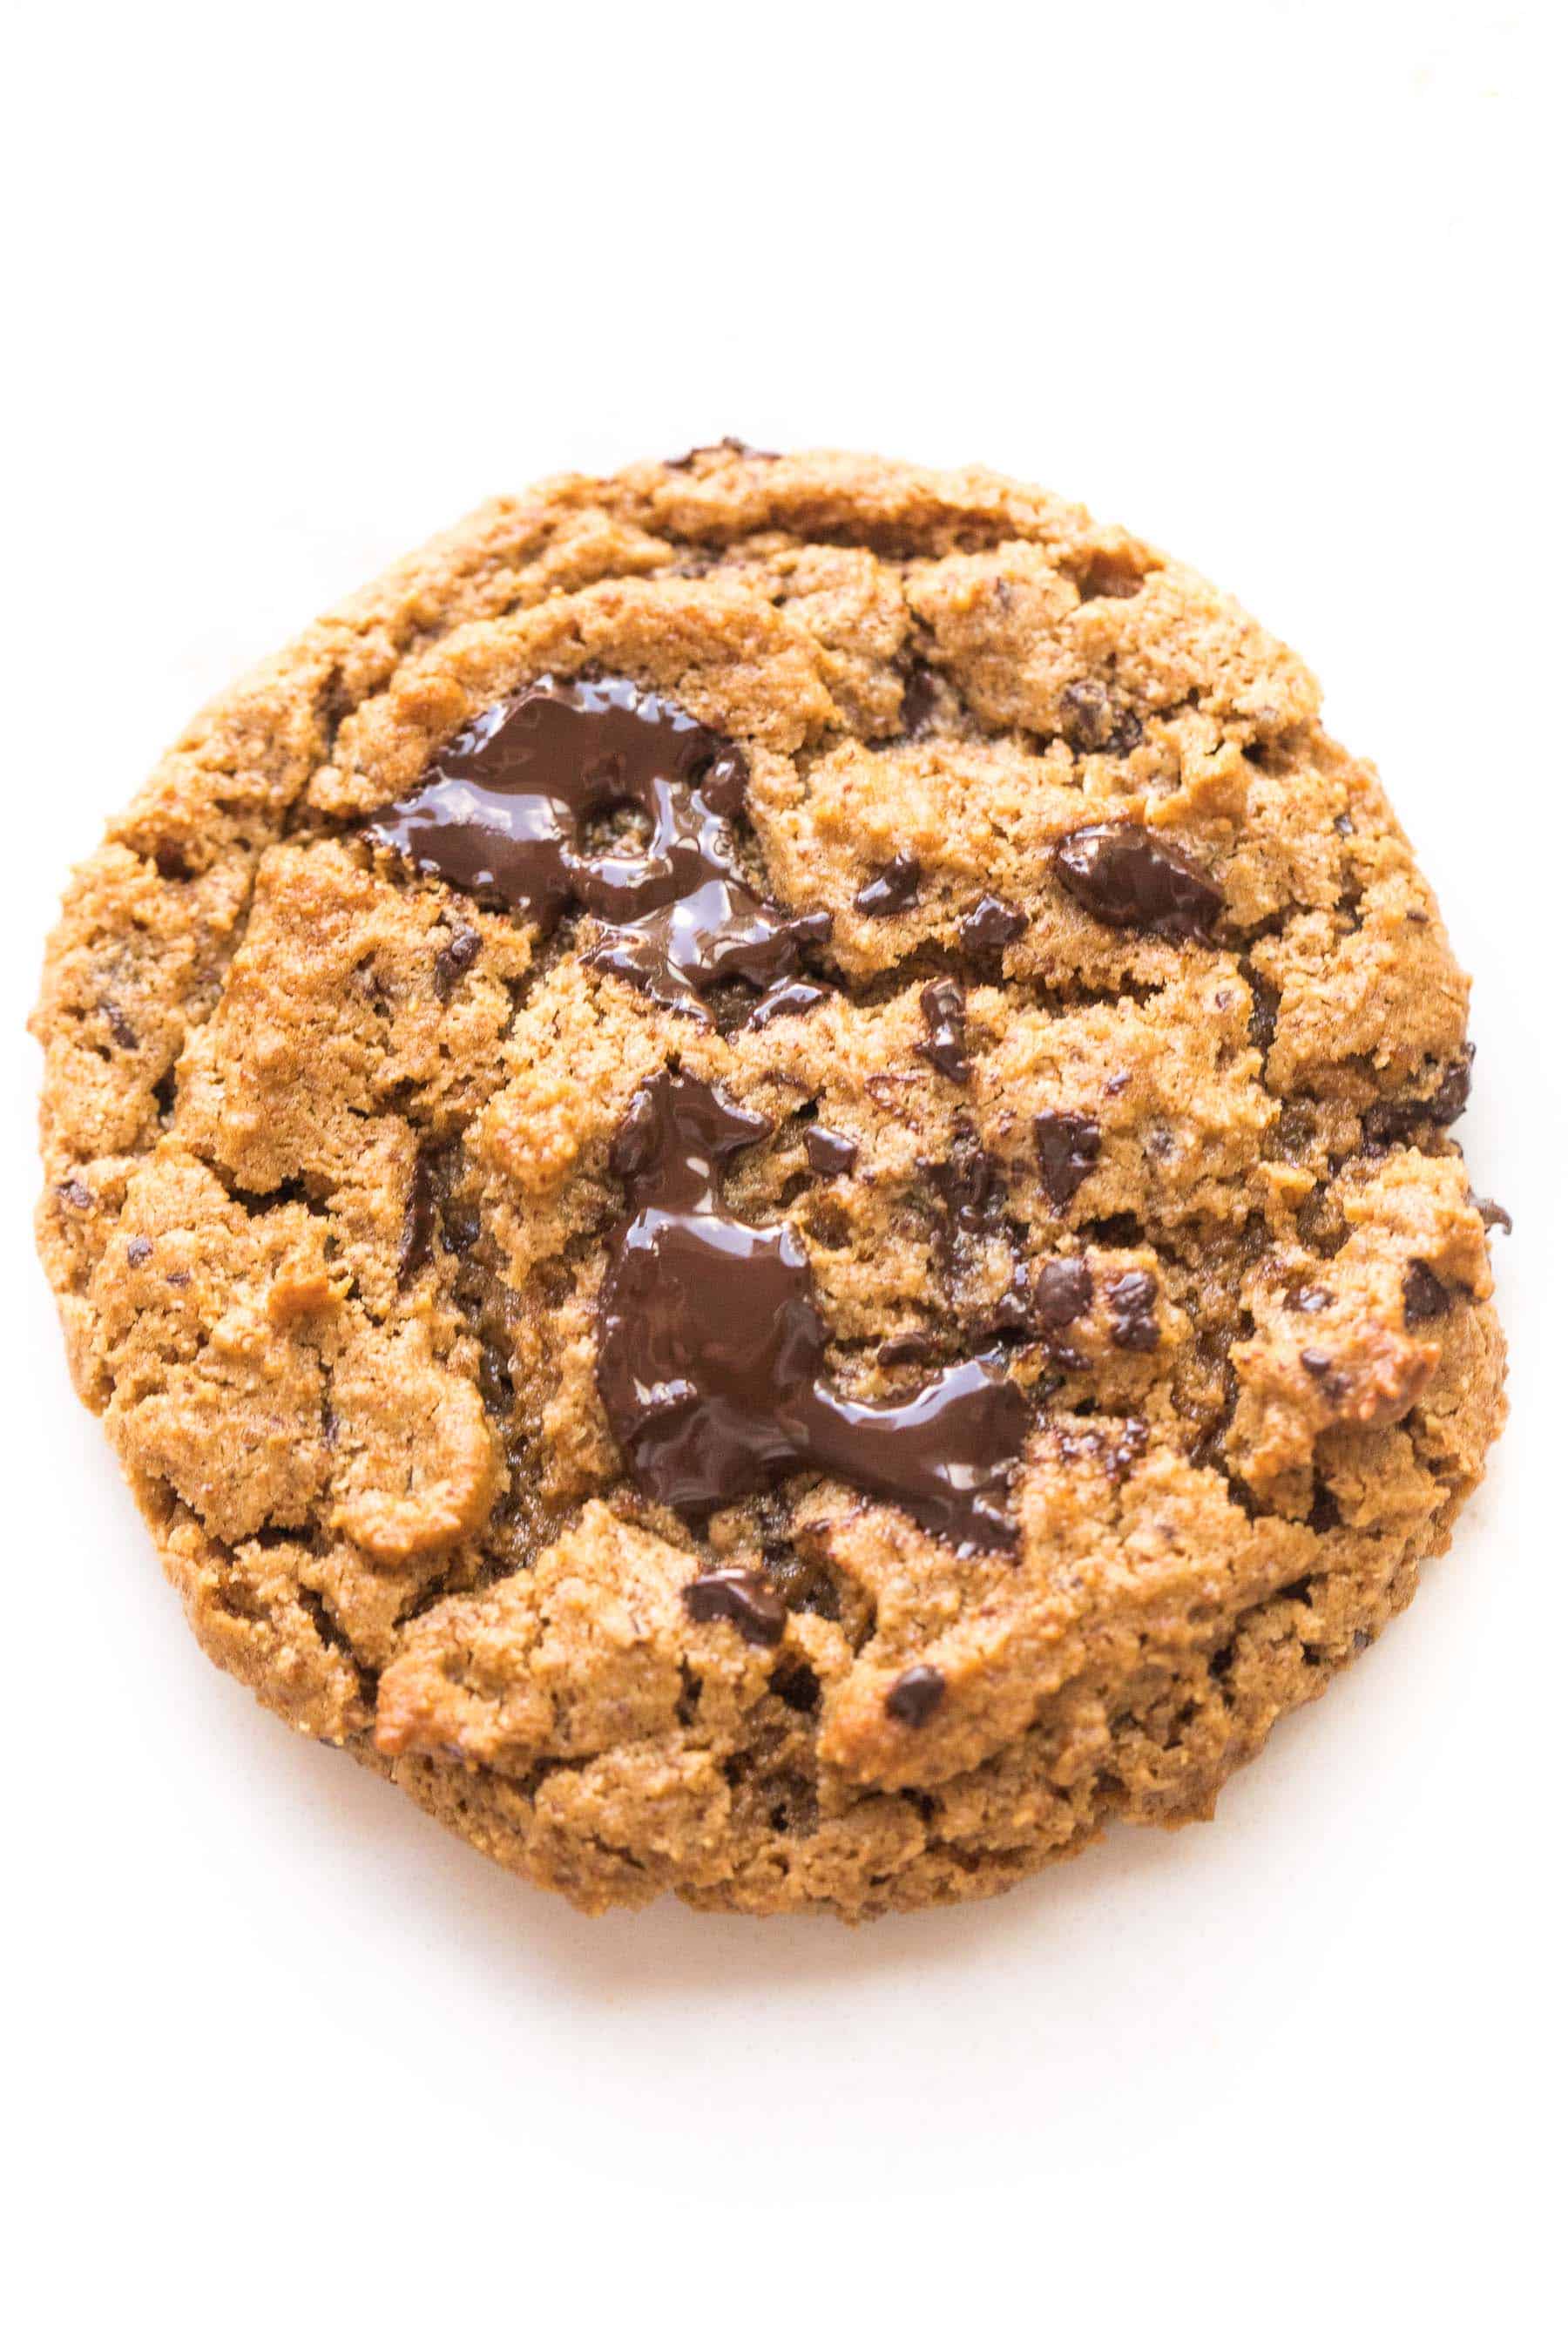 keto chocolate chip cookie on white background